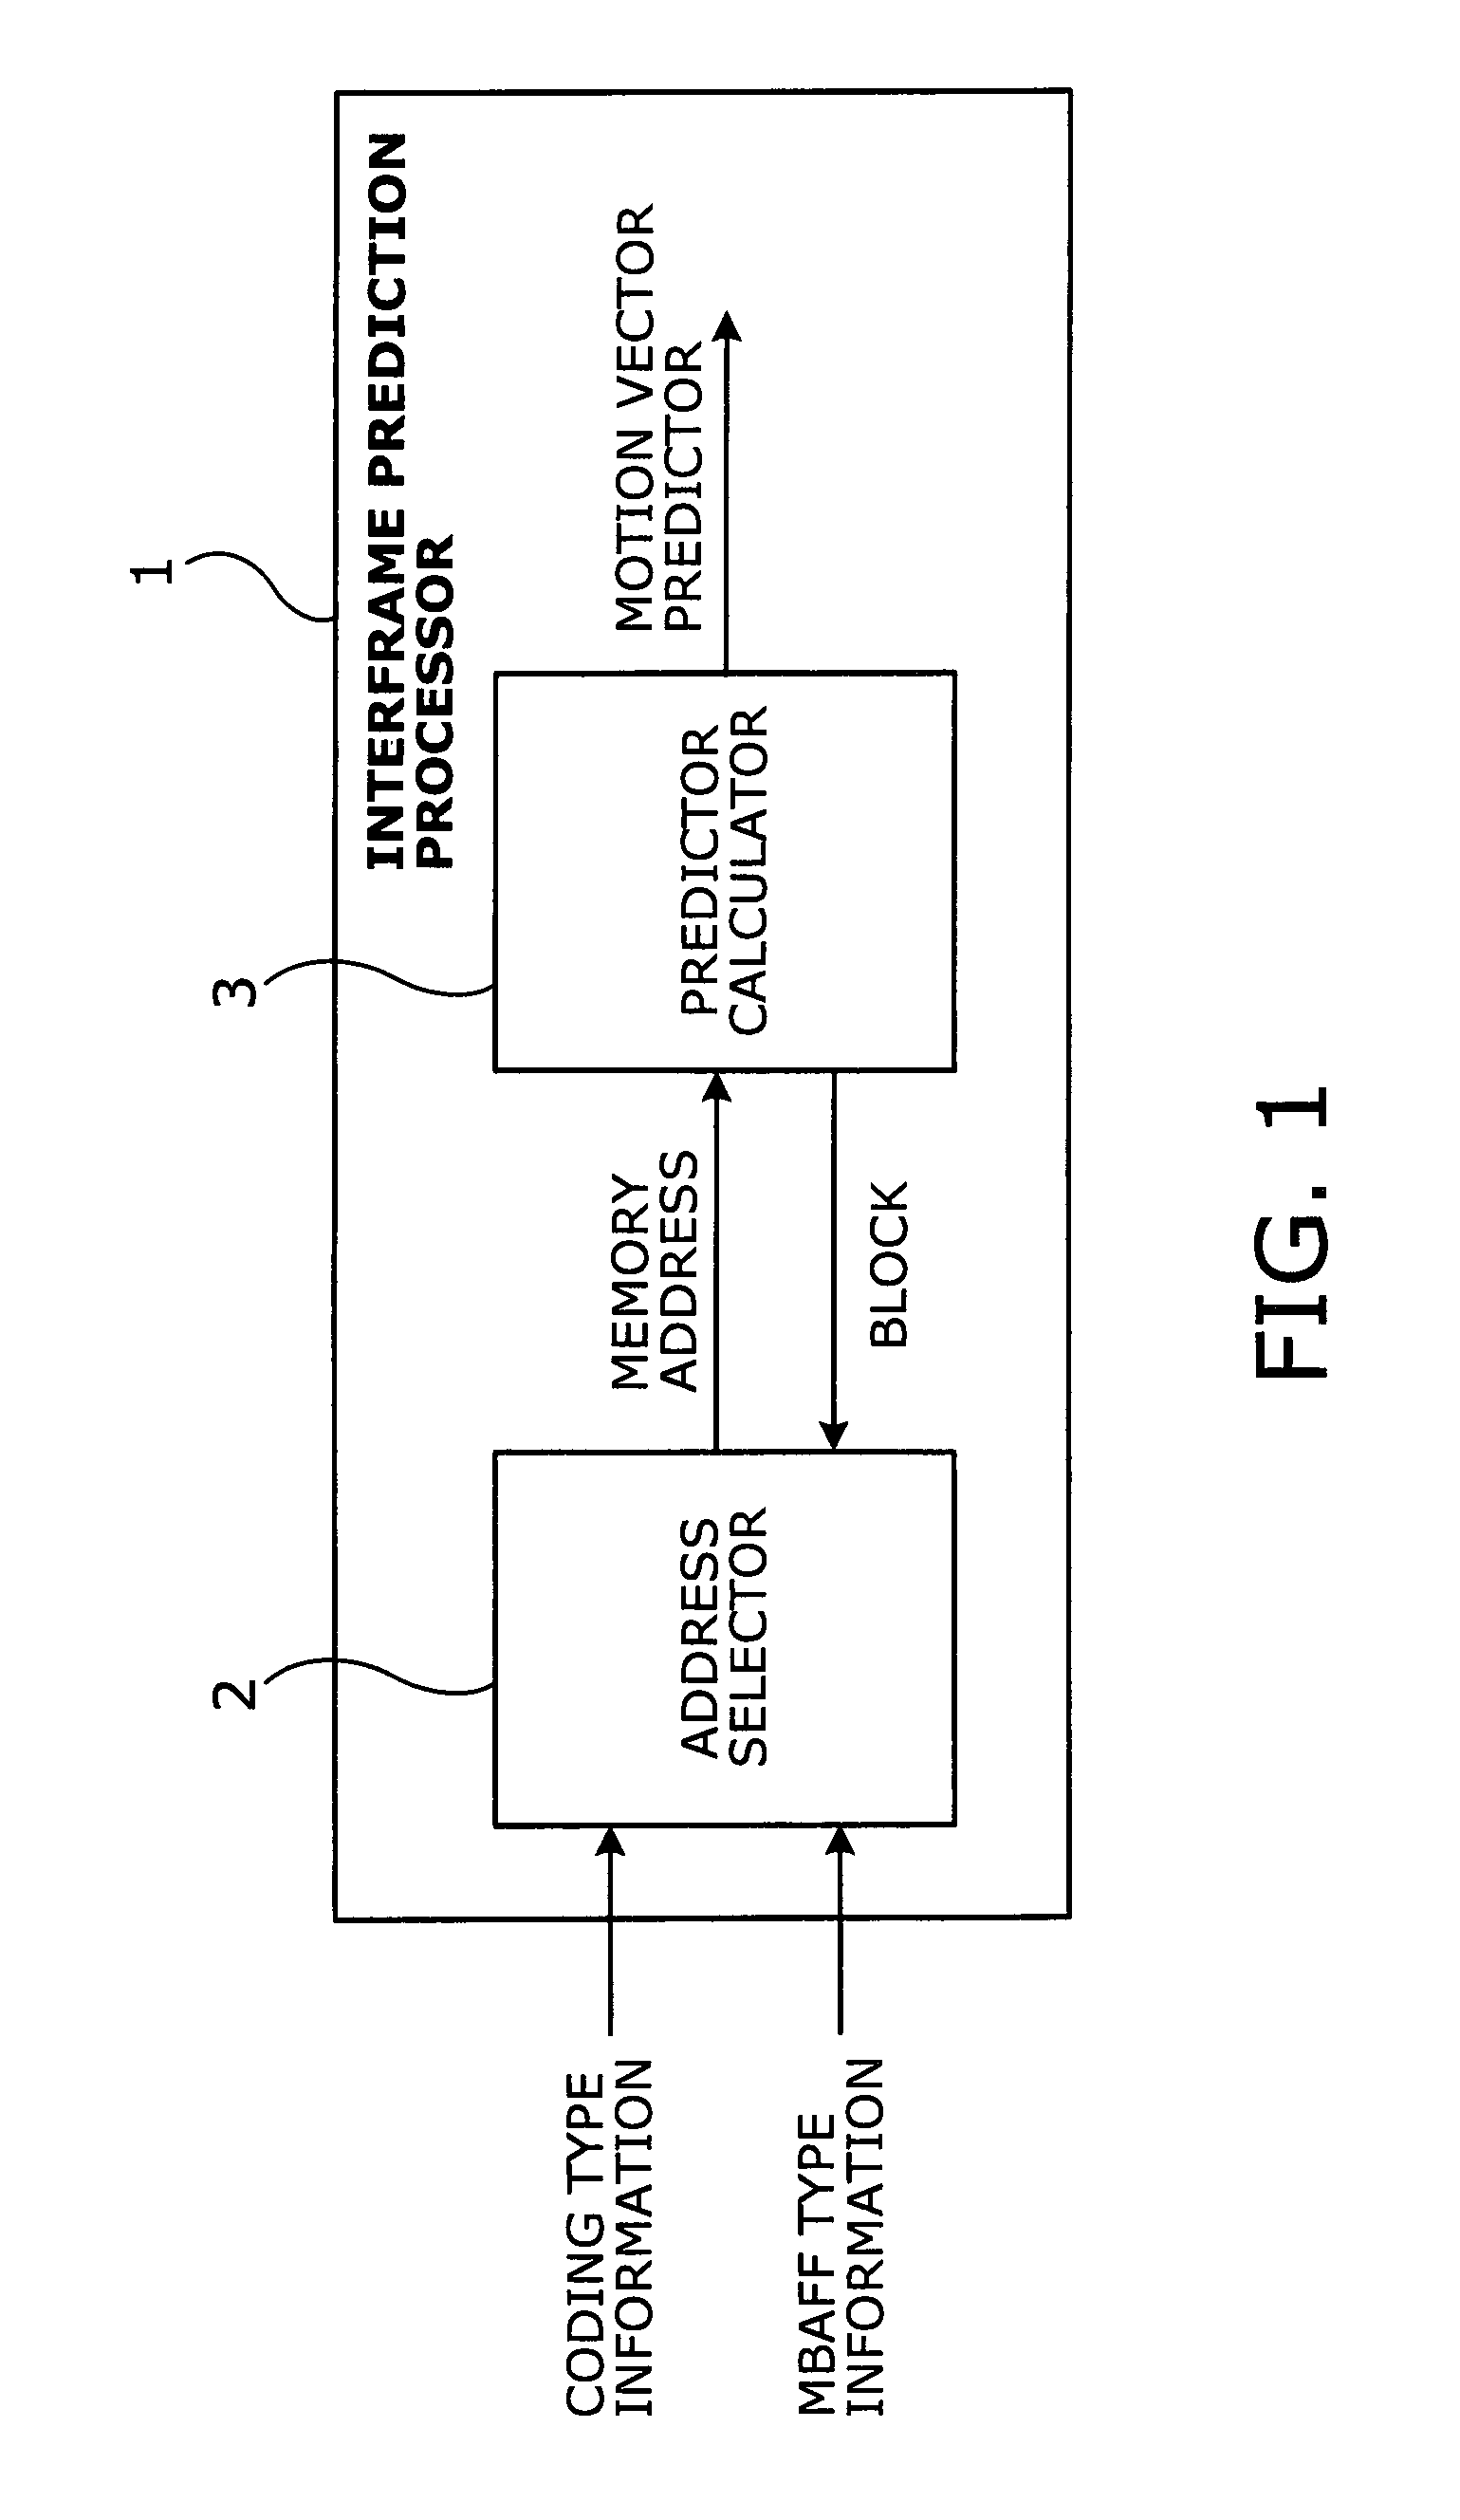 Interframe prediction processor with mechanism for providing locations of reference motion vectors used in macroblock adaptive field/frame mode